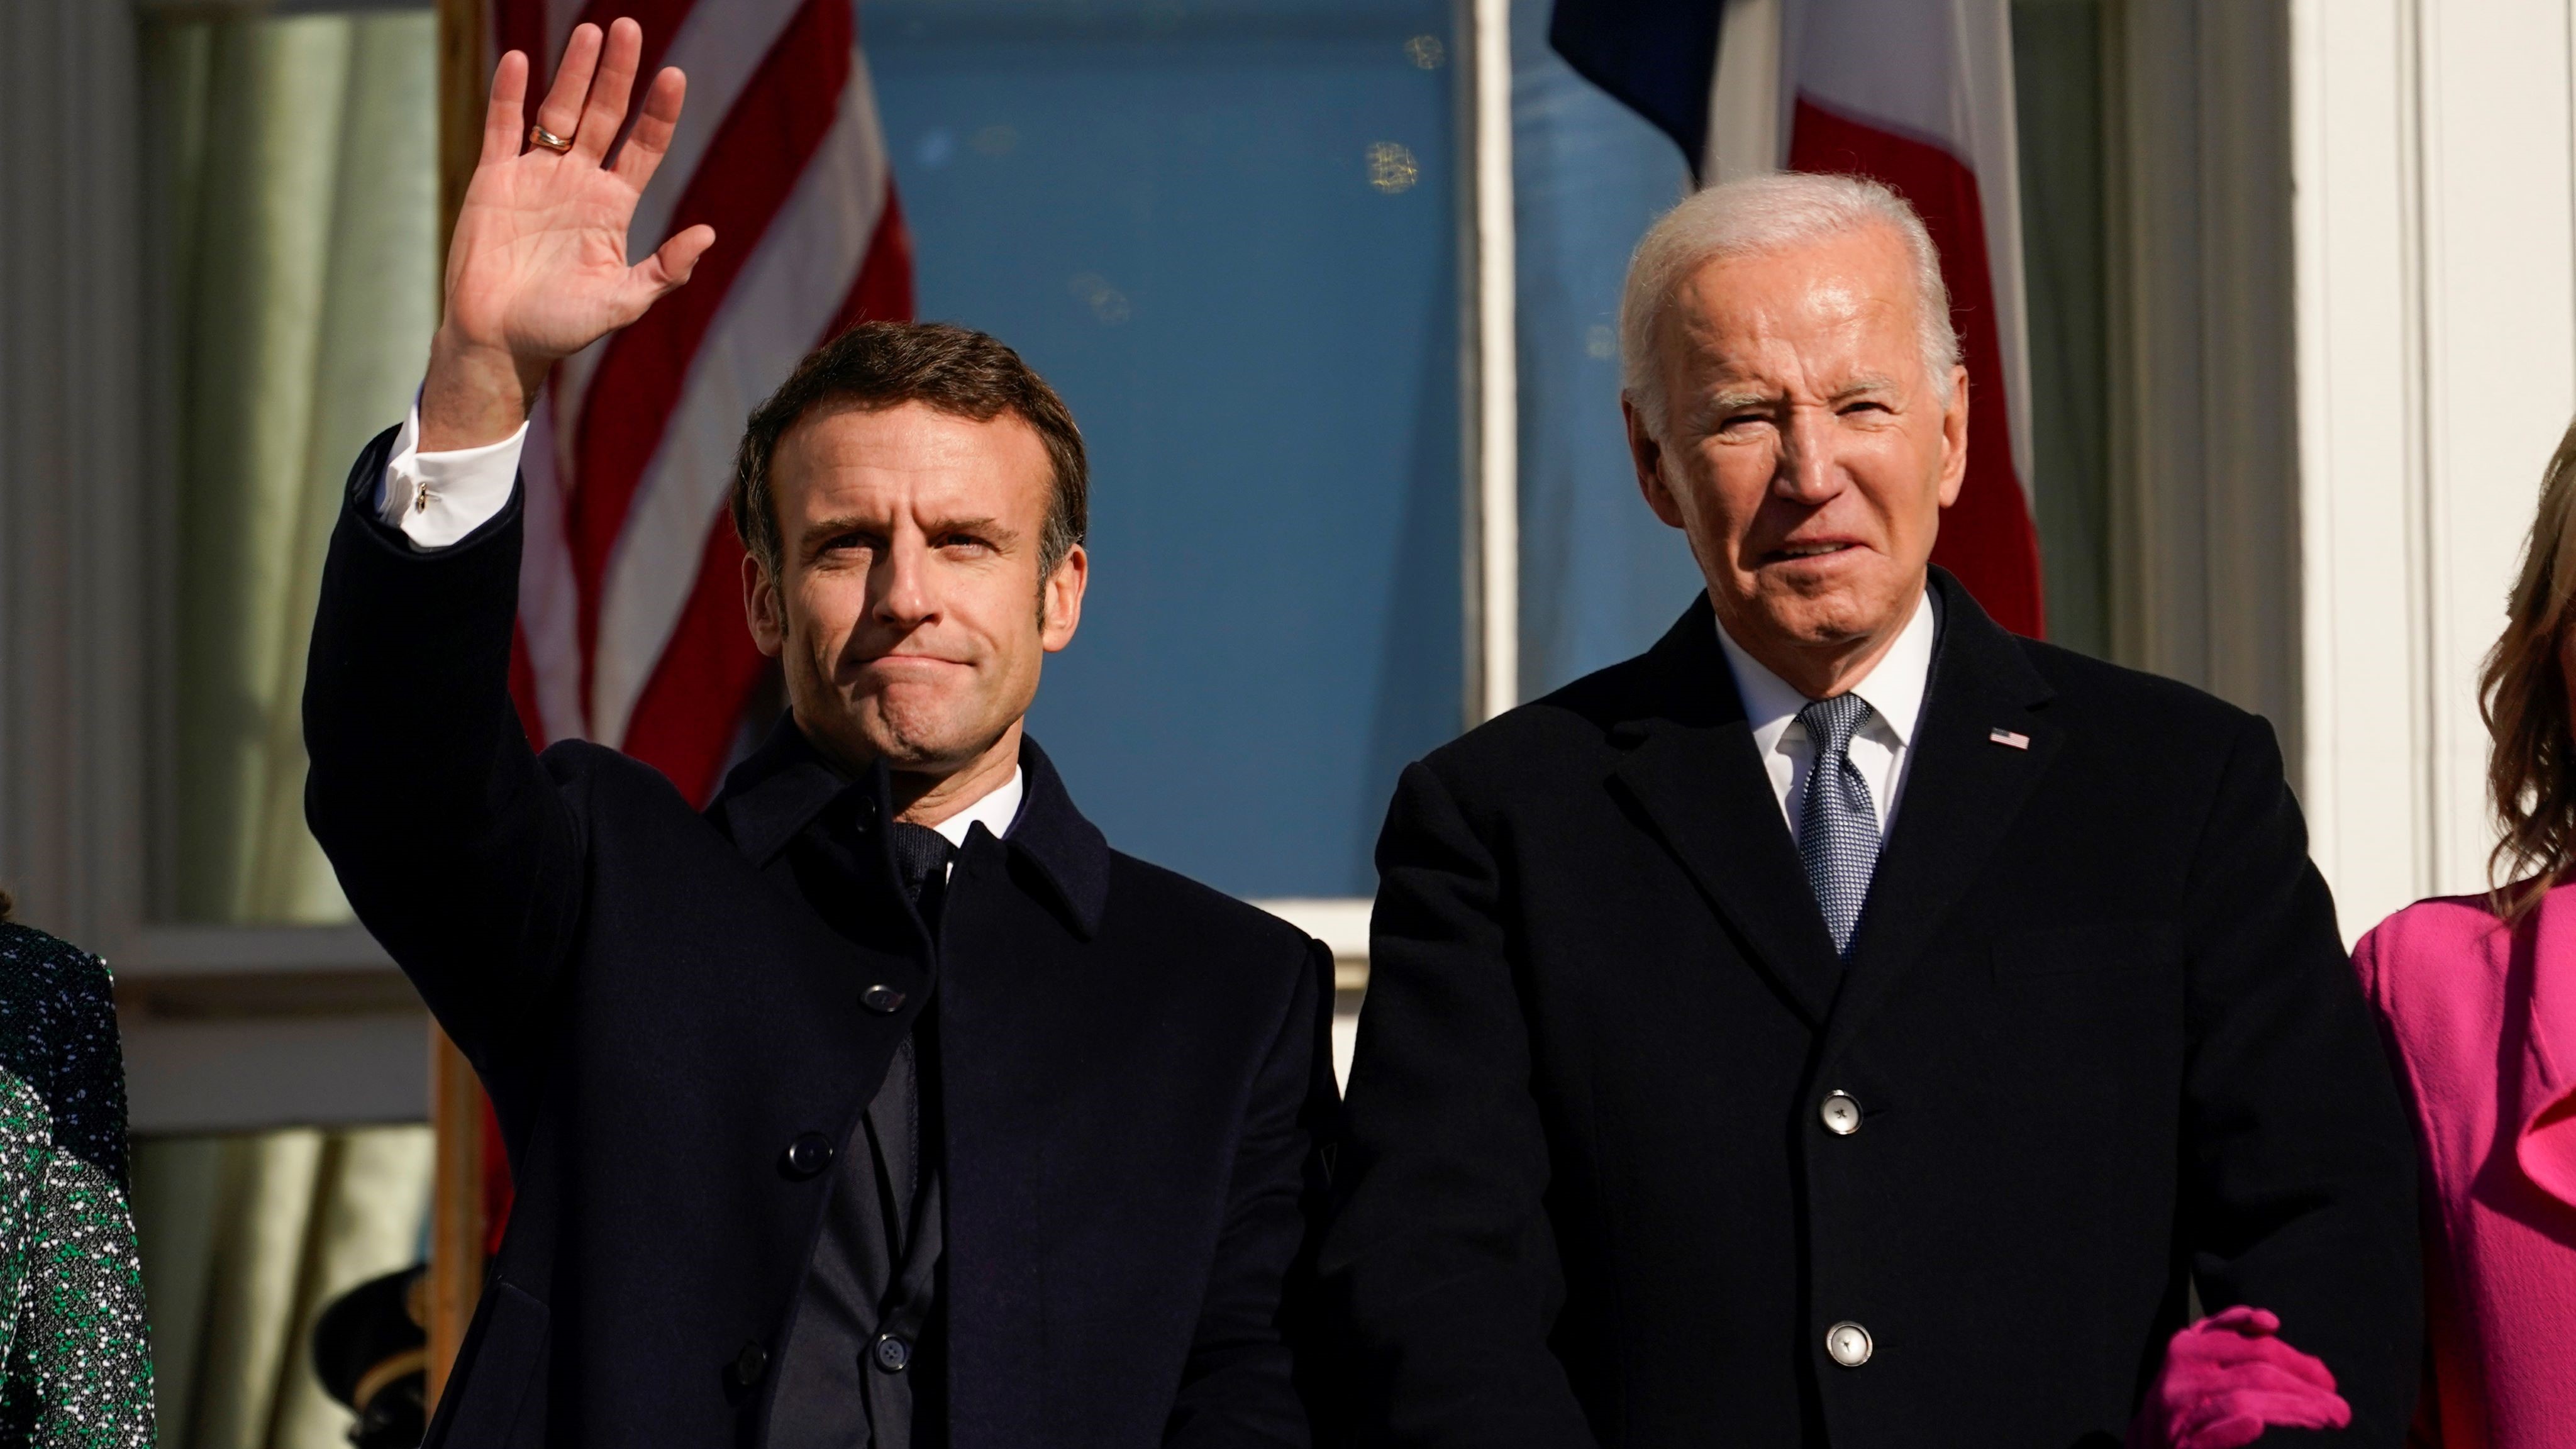 Macron's Visit Highlights Tensions in US-France Relations | WPR